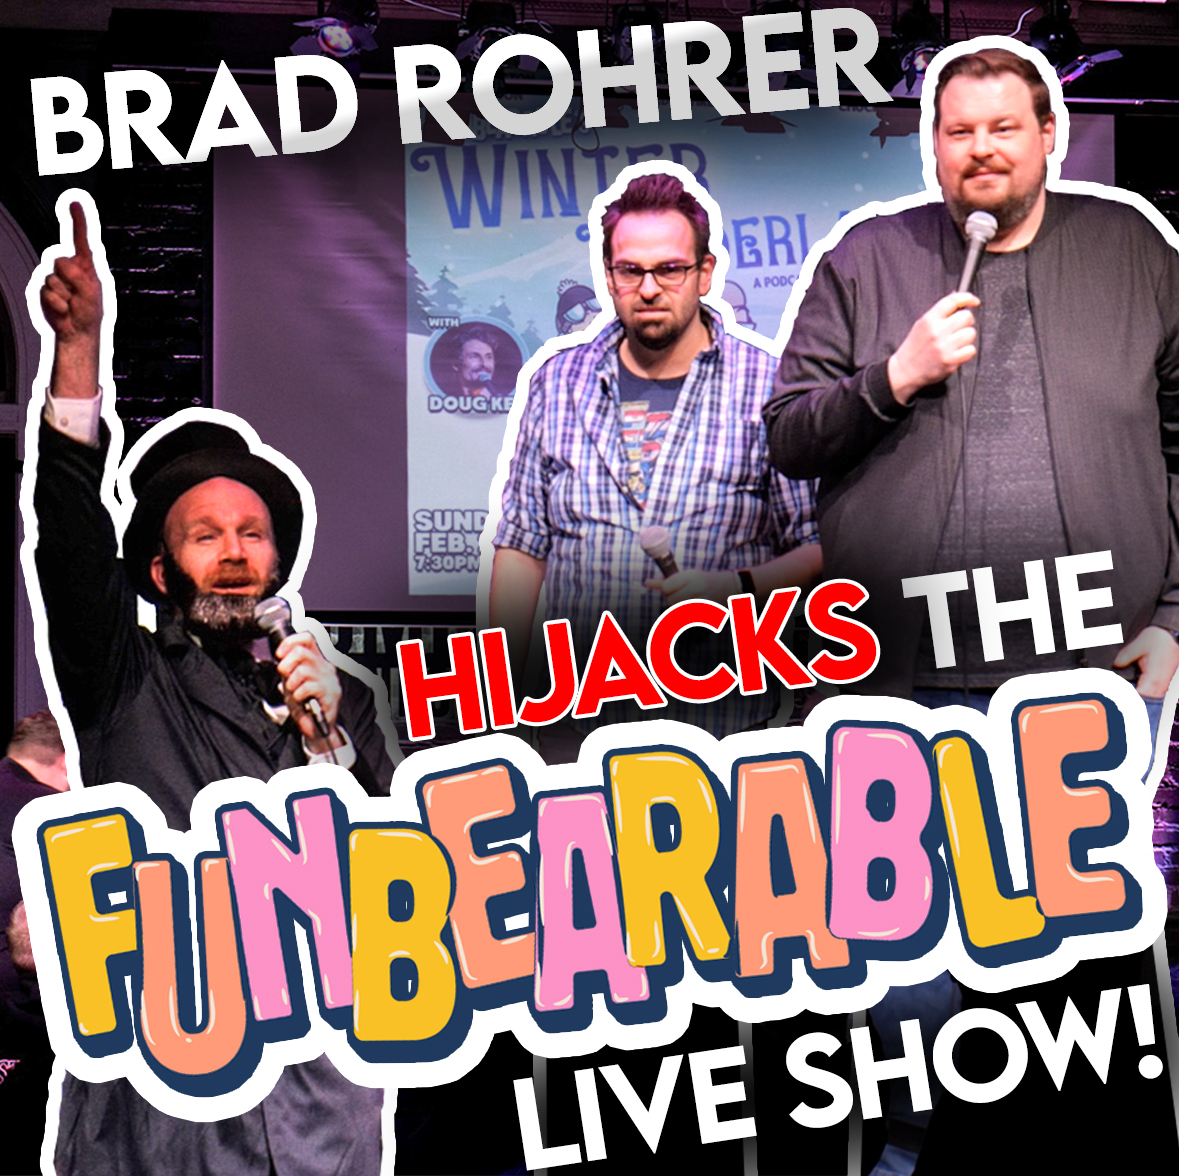 The opening segment of Funbearable's Winter Funderland live show is up now on Youtube. Not how we wanted to open the show. @bradrohrer @rayharrington @discountchuck #podcast #live #hijack #heckler link in comments